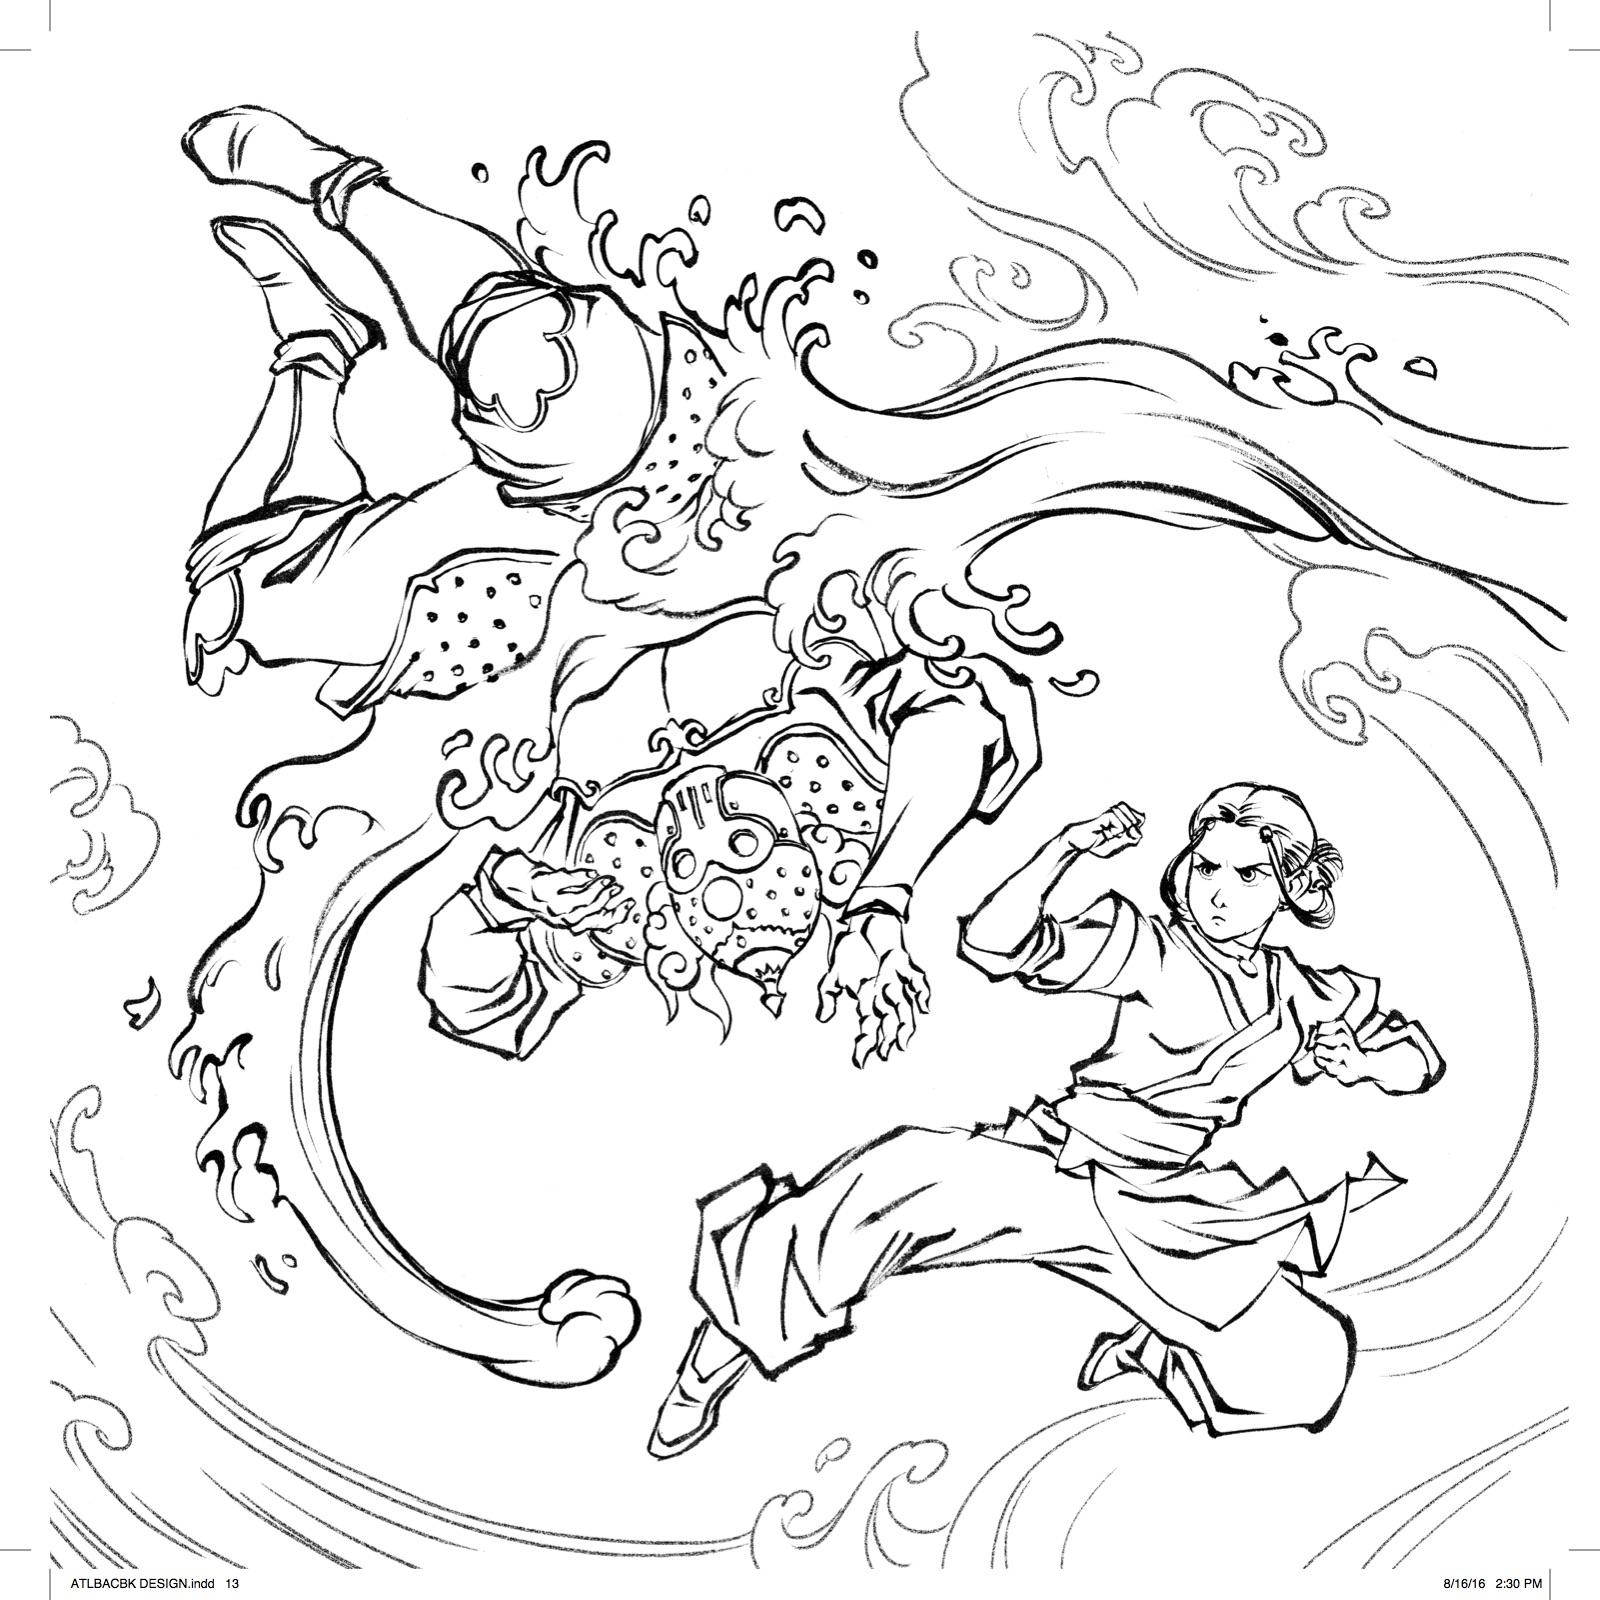 Avatar The Last Airbender Coloring Pages Free Pdf - Avatar The Last Airbender Coloring Pages Free